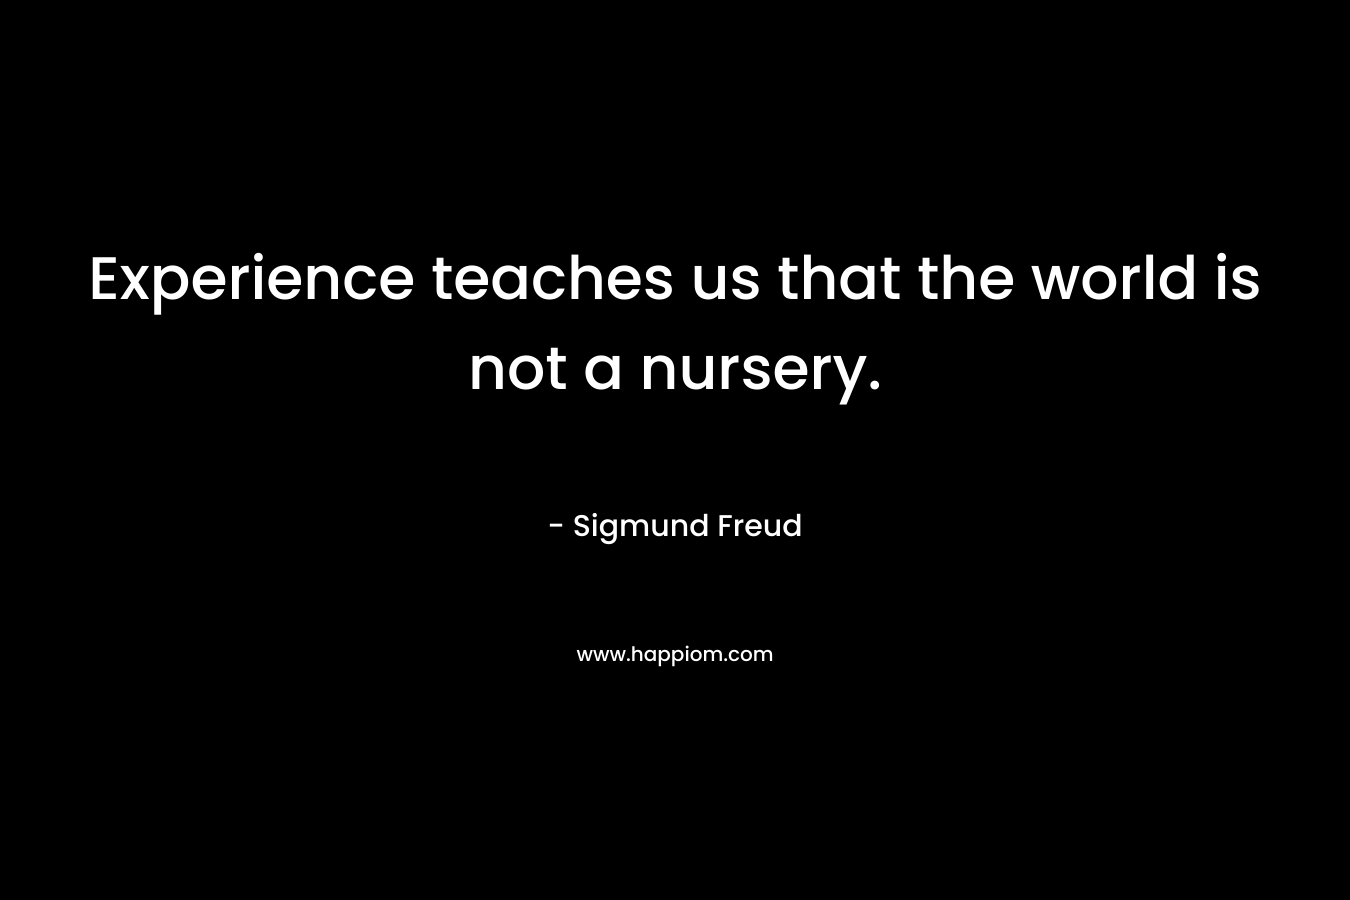 Experience teaches us that the world is not a nursery.